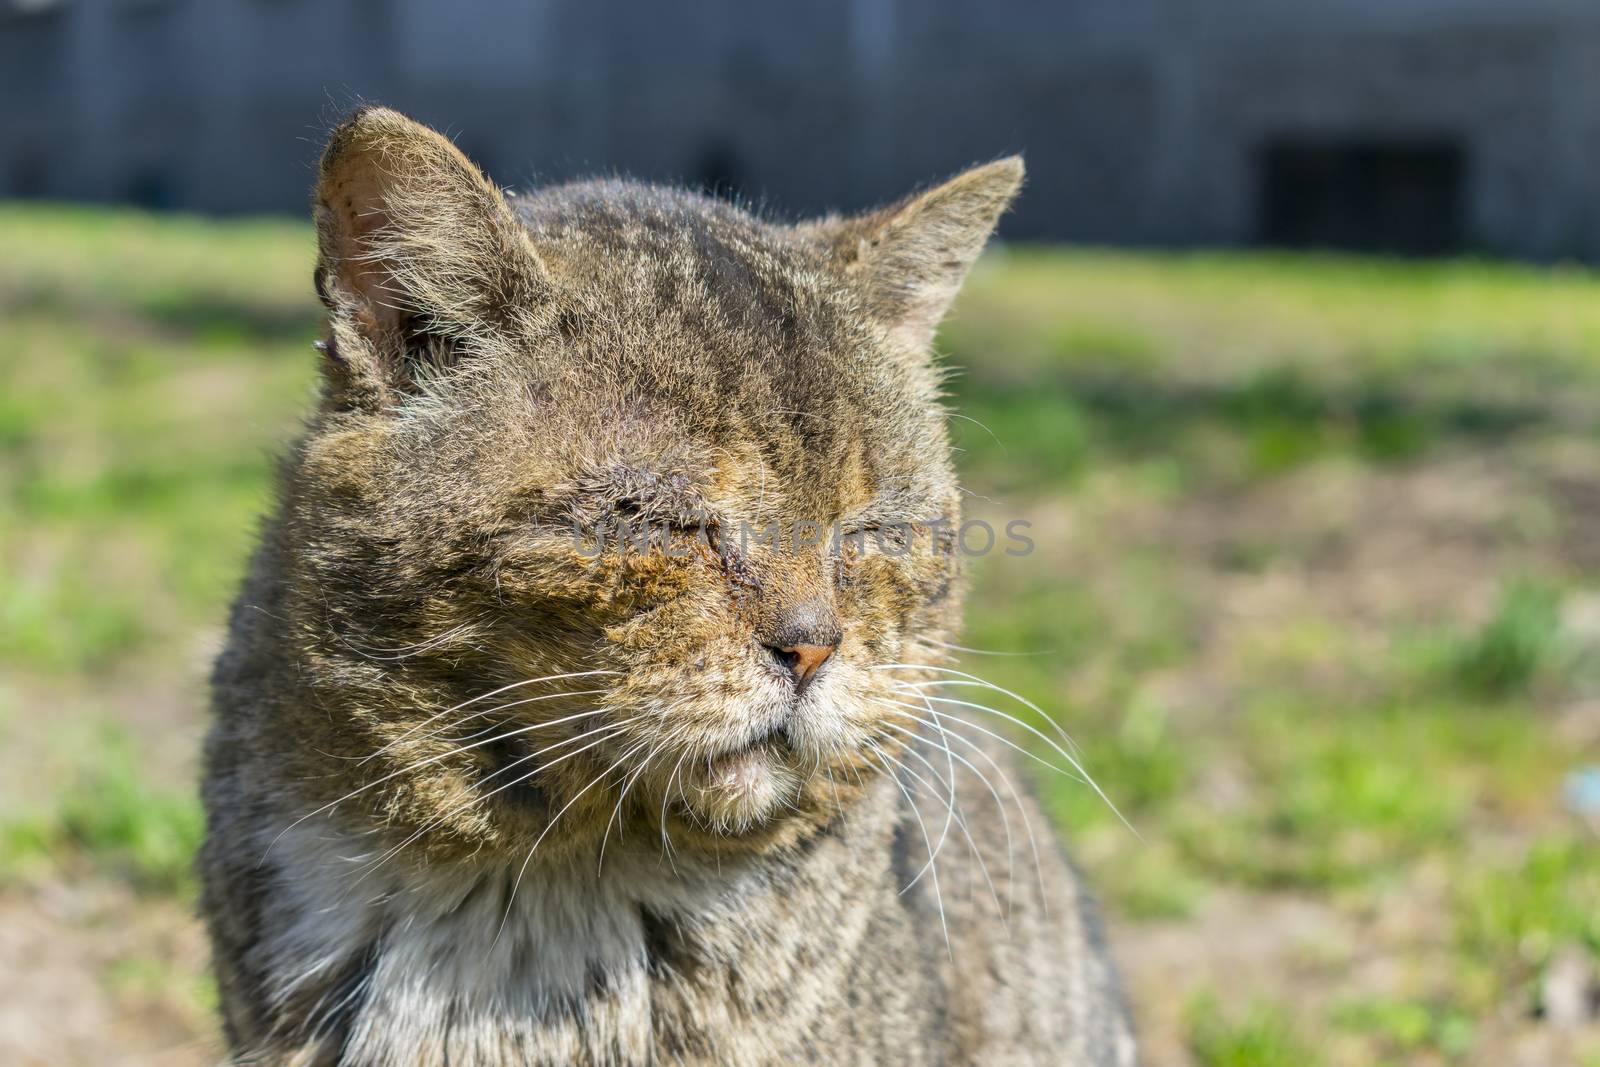 A beaten old street cat without an eye, a blind man sits on the street